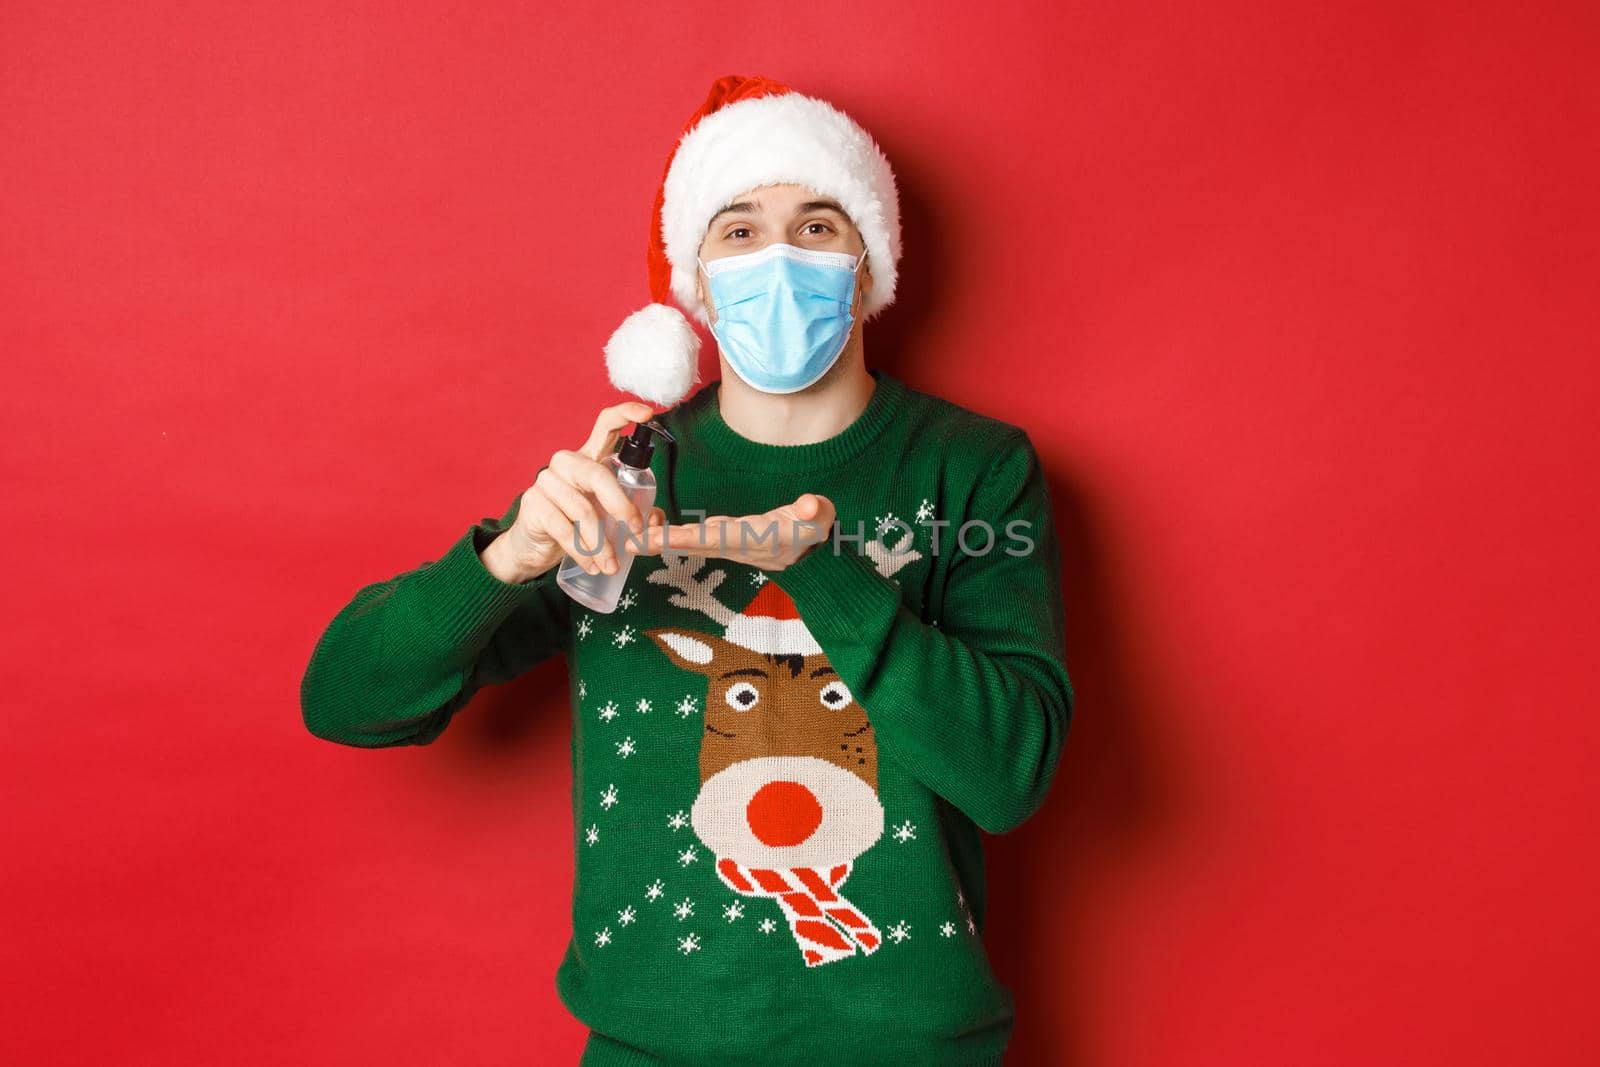 Concept of new year, coronavirus and social distancing. Attractive young man in santa hat, medical mask and christmas sweater, using hand sanitizer to clean hands, standing over red background.